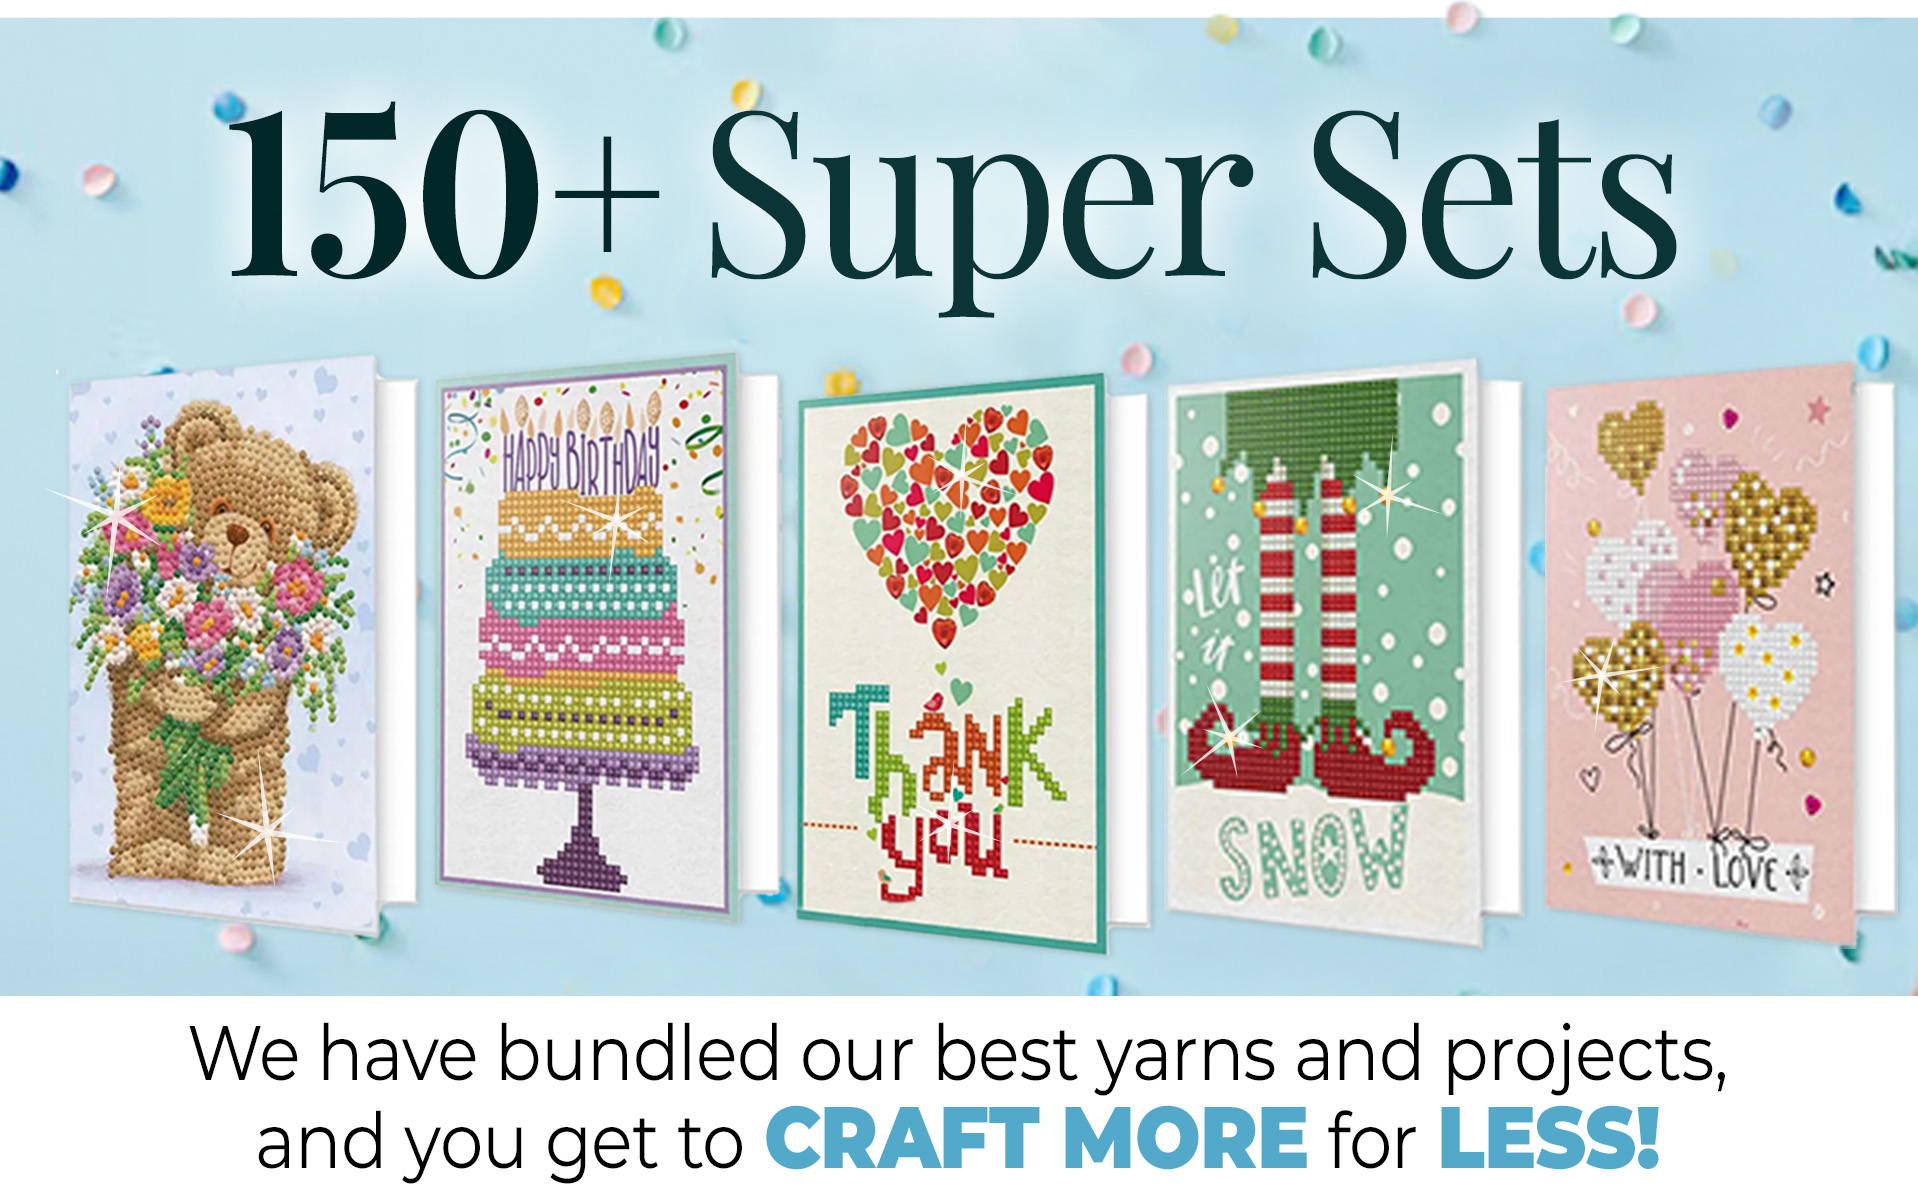 150+ Super Sets so you can craft More for Less! Image: Diamond Dotz All Occasion Card Pack, Set of 5 Diamond Painting.